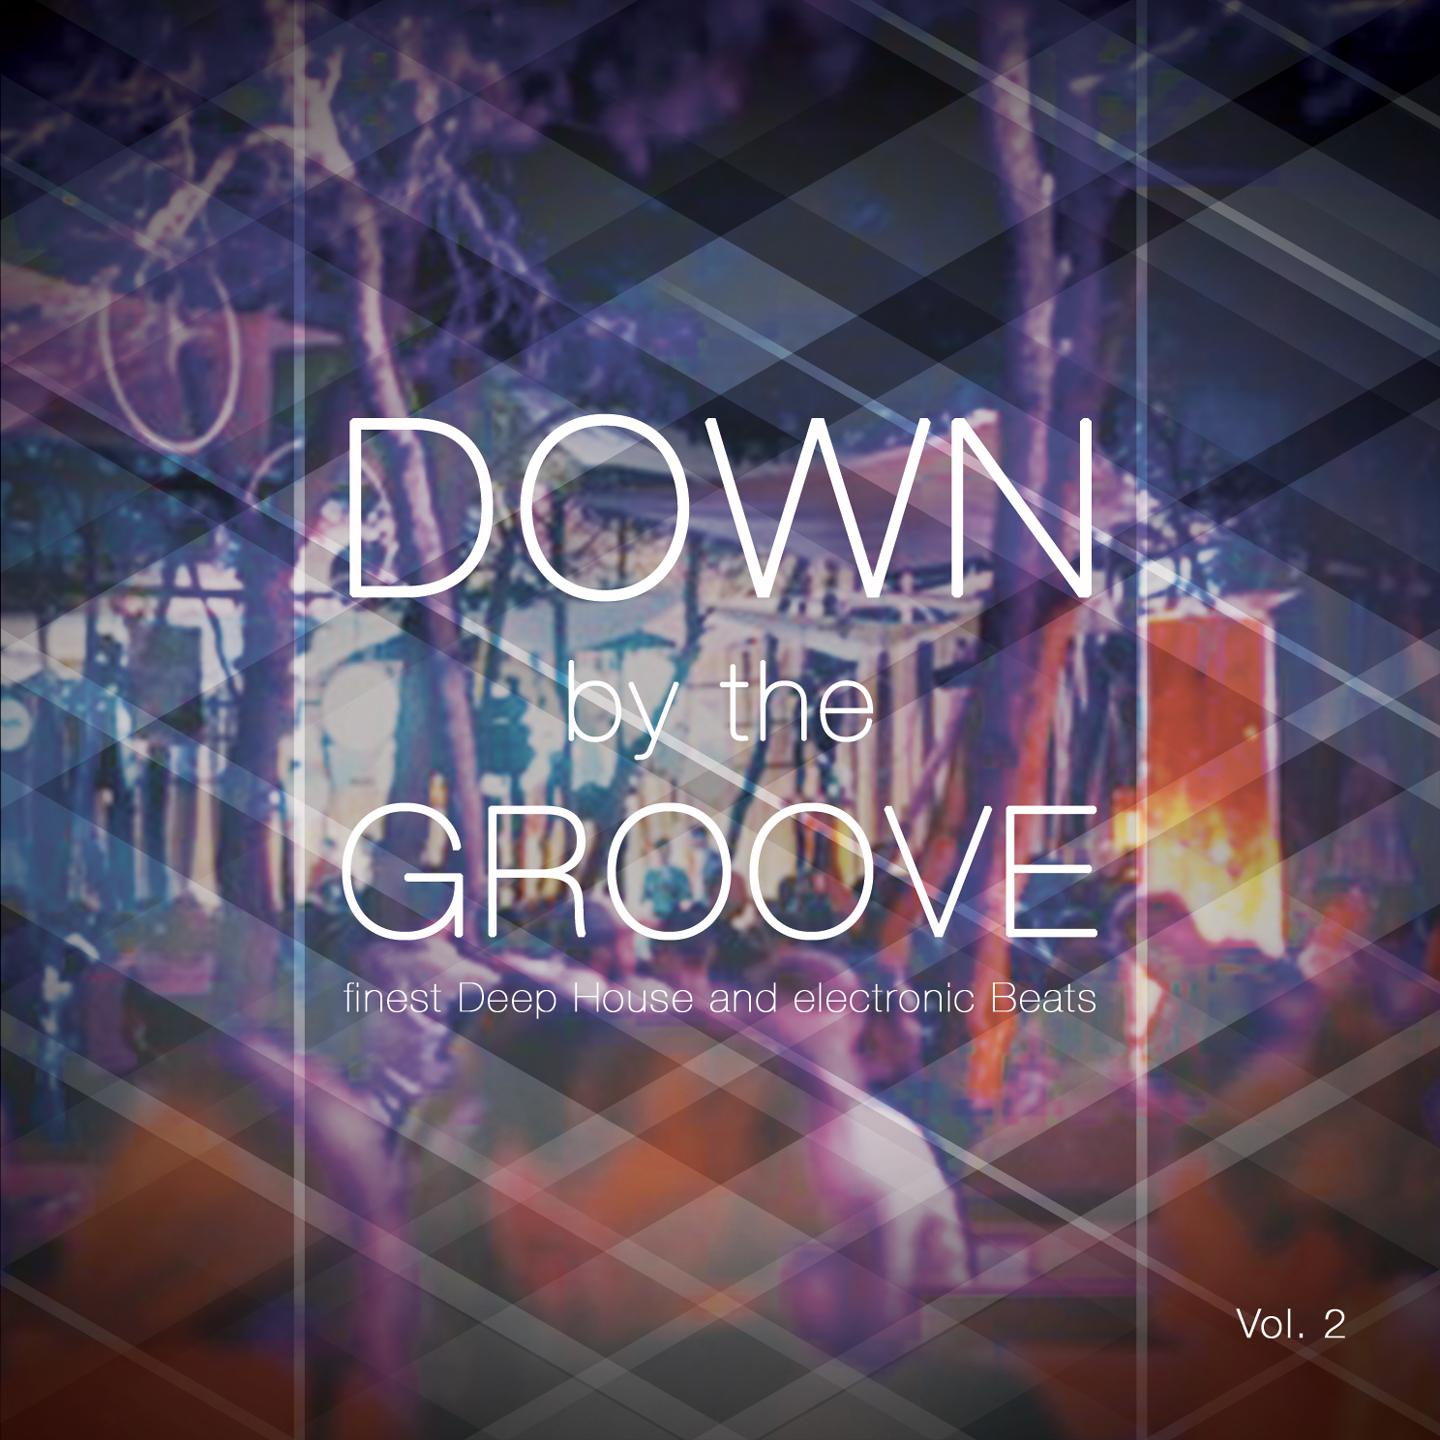 Down by the Groove, Vol. 2 (Finest Deep House and Electronic Beats)